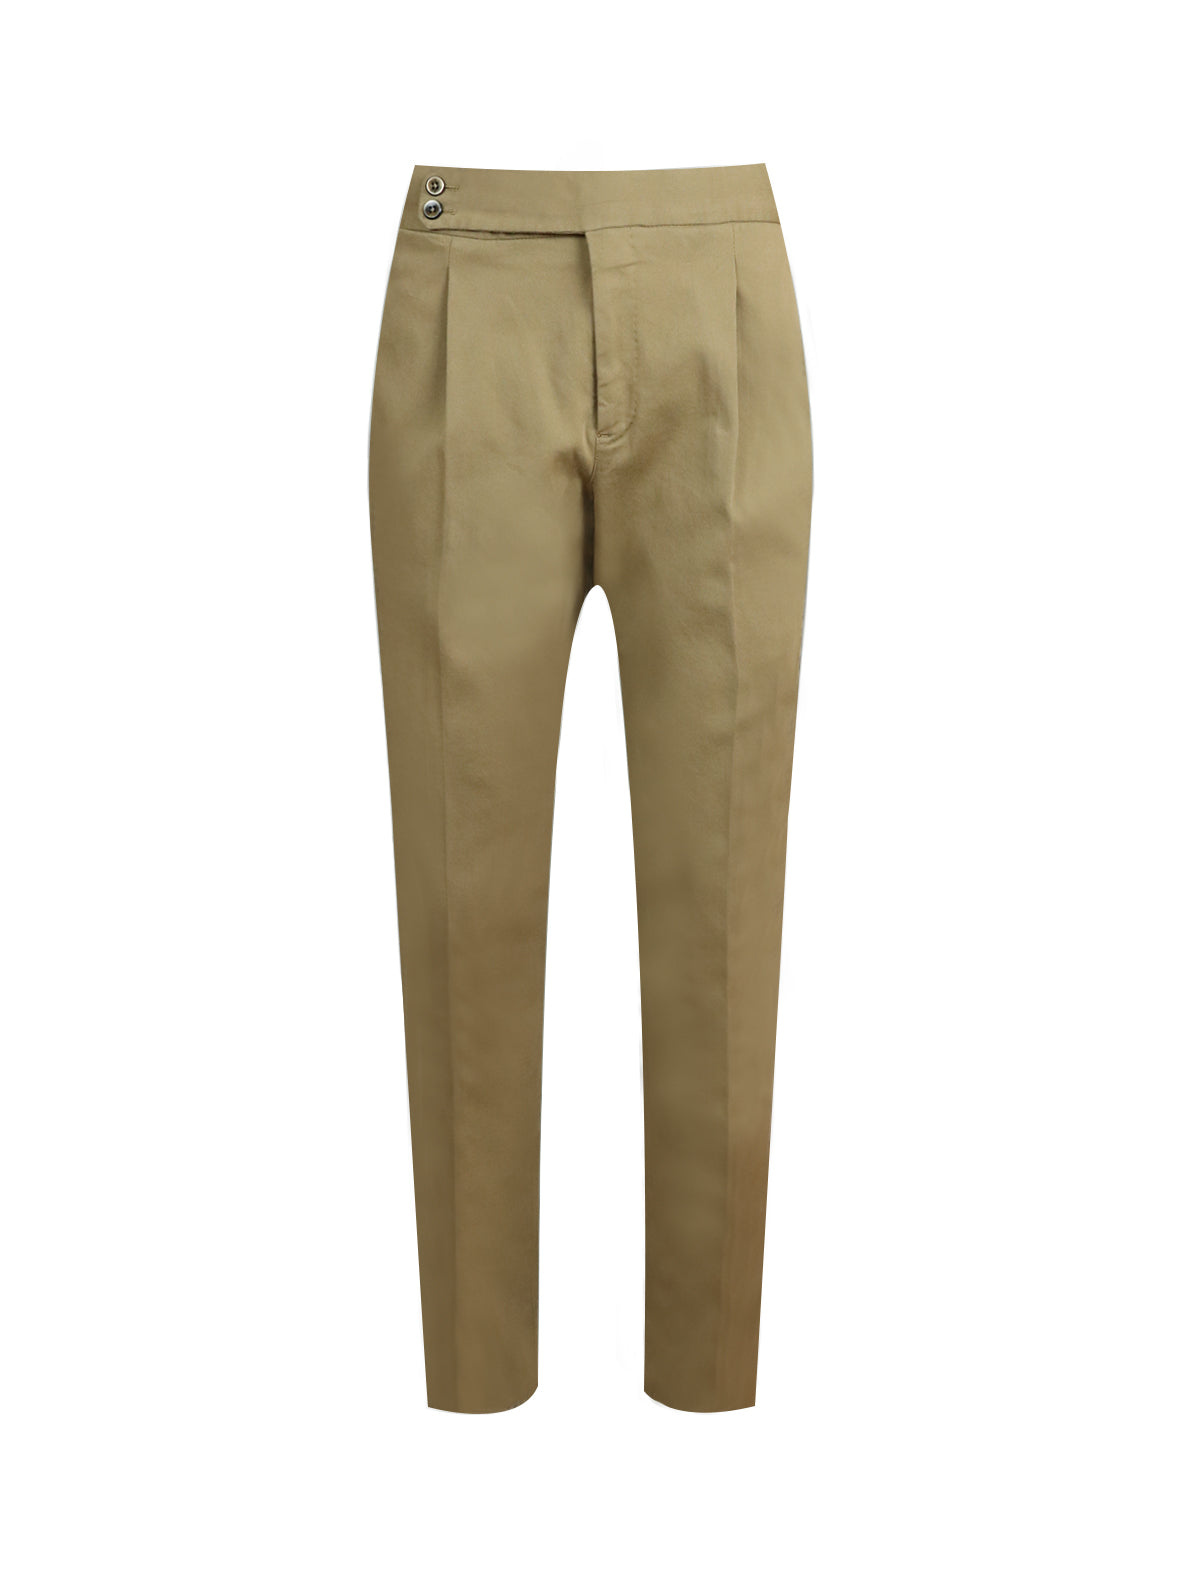 PT Torino Cotton Tapered Trouser in Camel